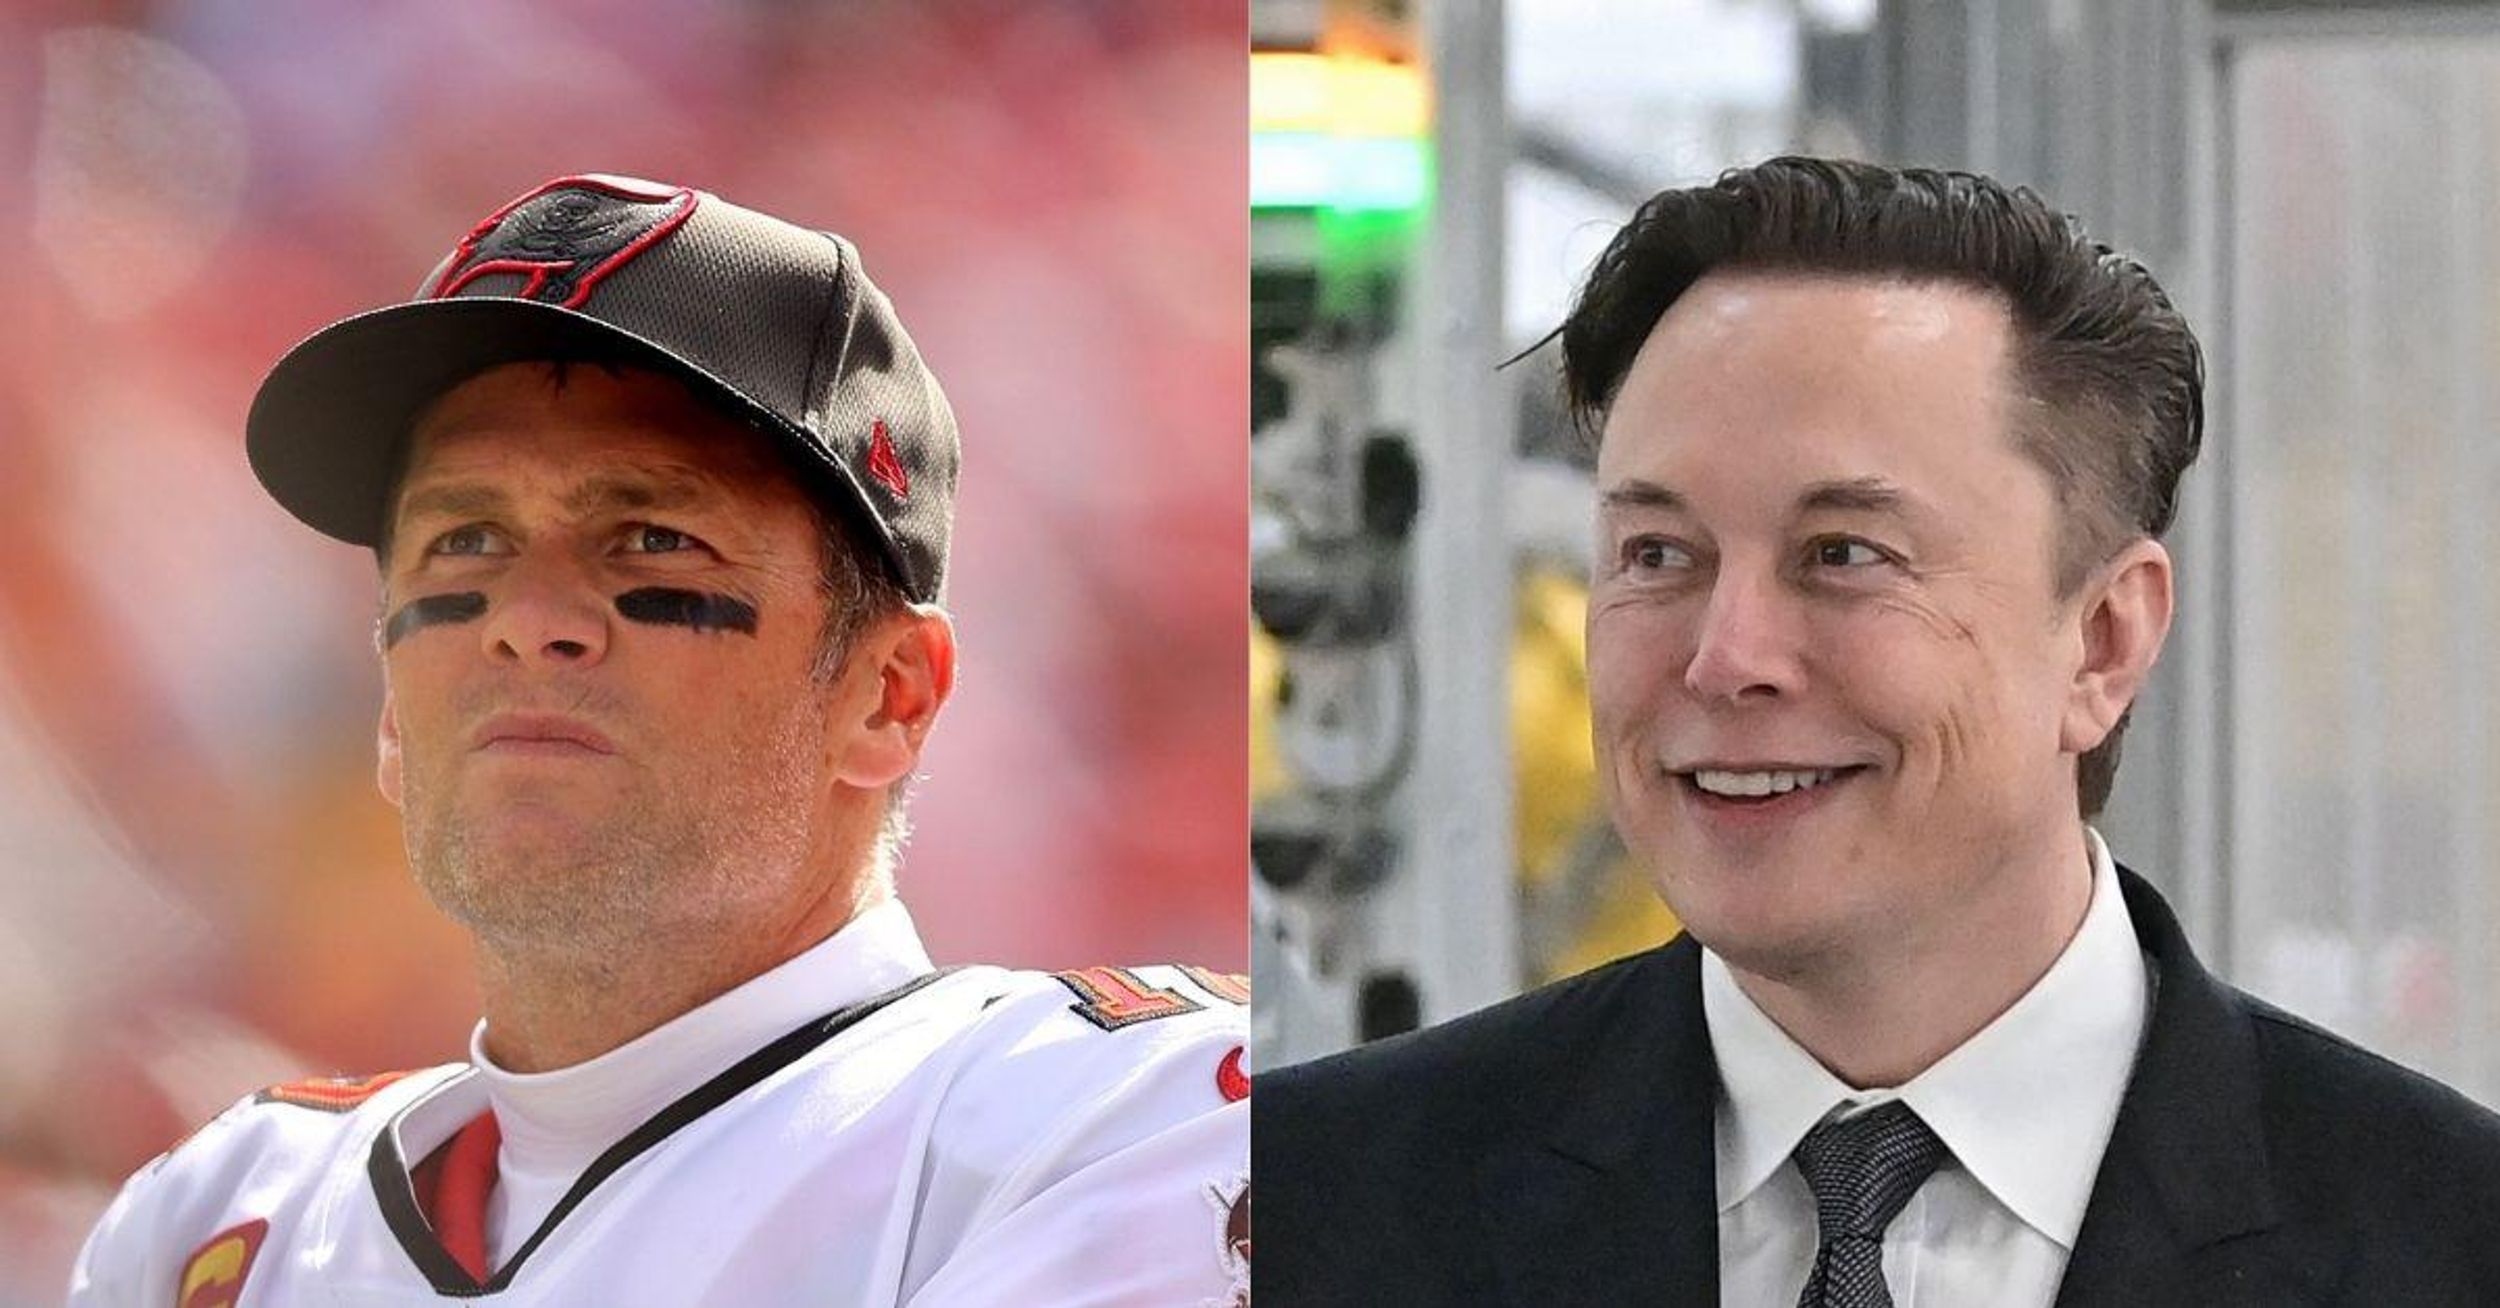 Tom Brady Just Asked Elon Musk To Ban An Infamous Shirtless Photo Of Him If He Buys Twitter